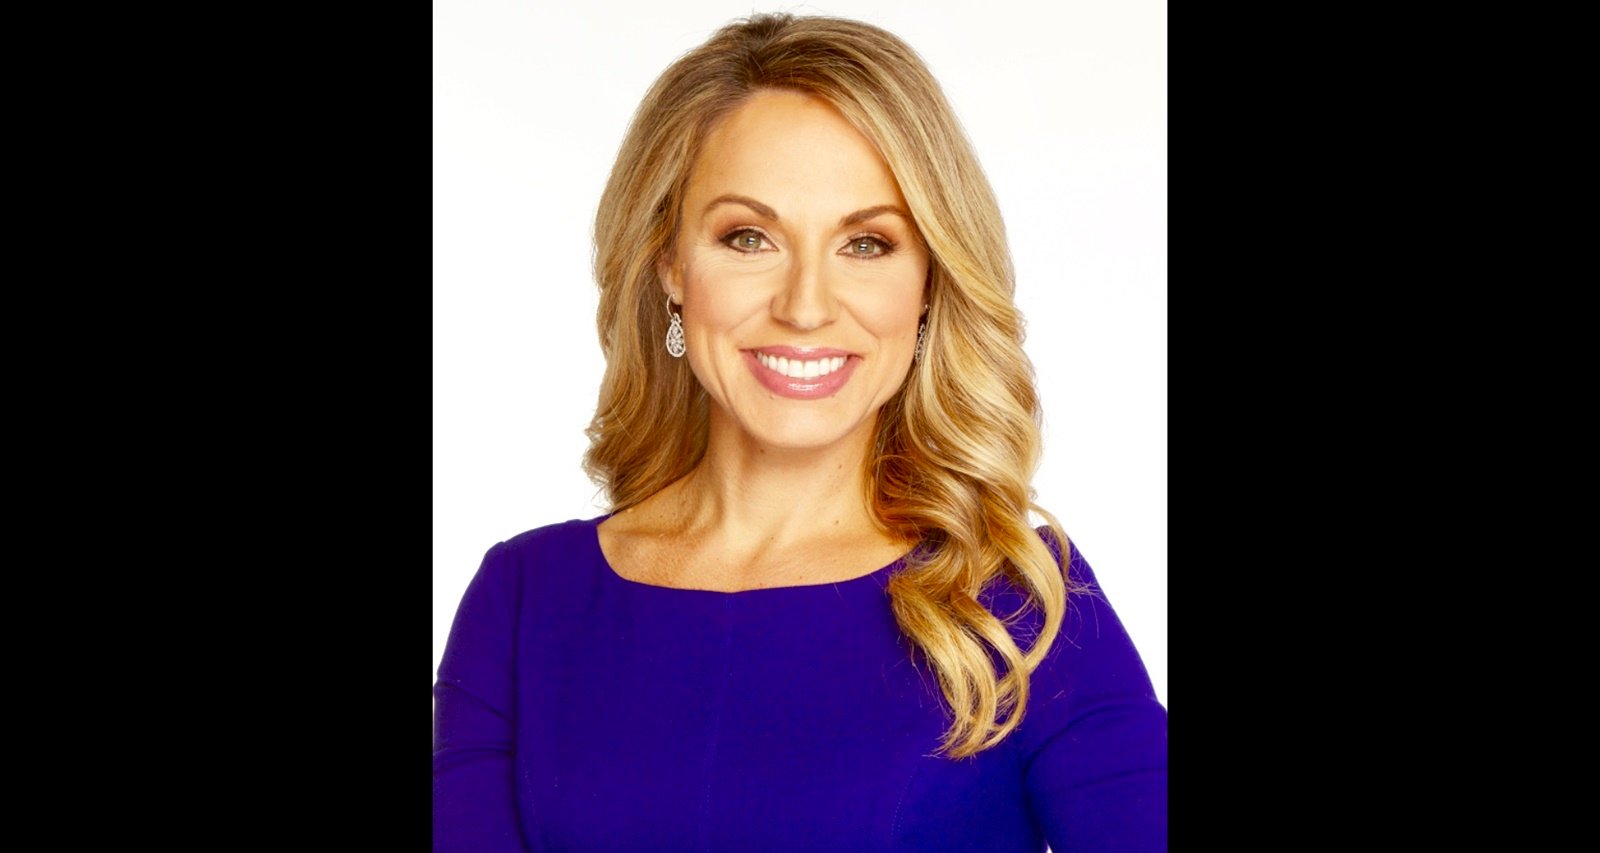 Find out about the Fox News contributor in Dr. Nicole Saphier’s wiki. 